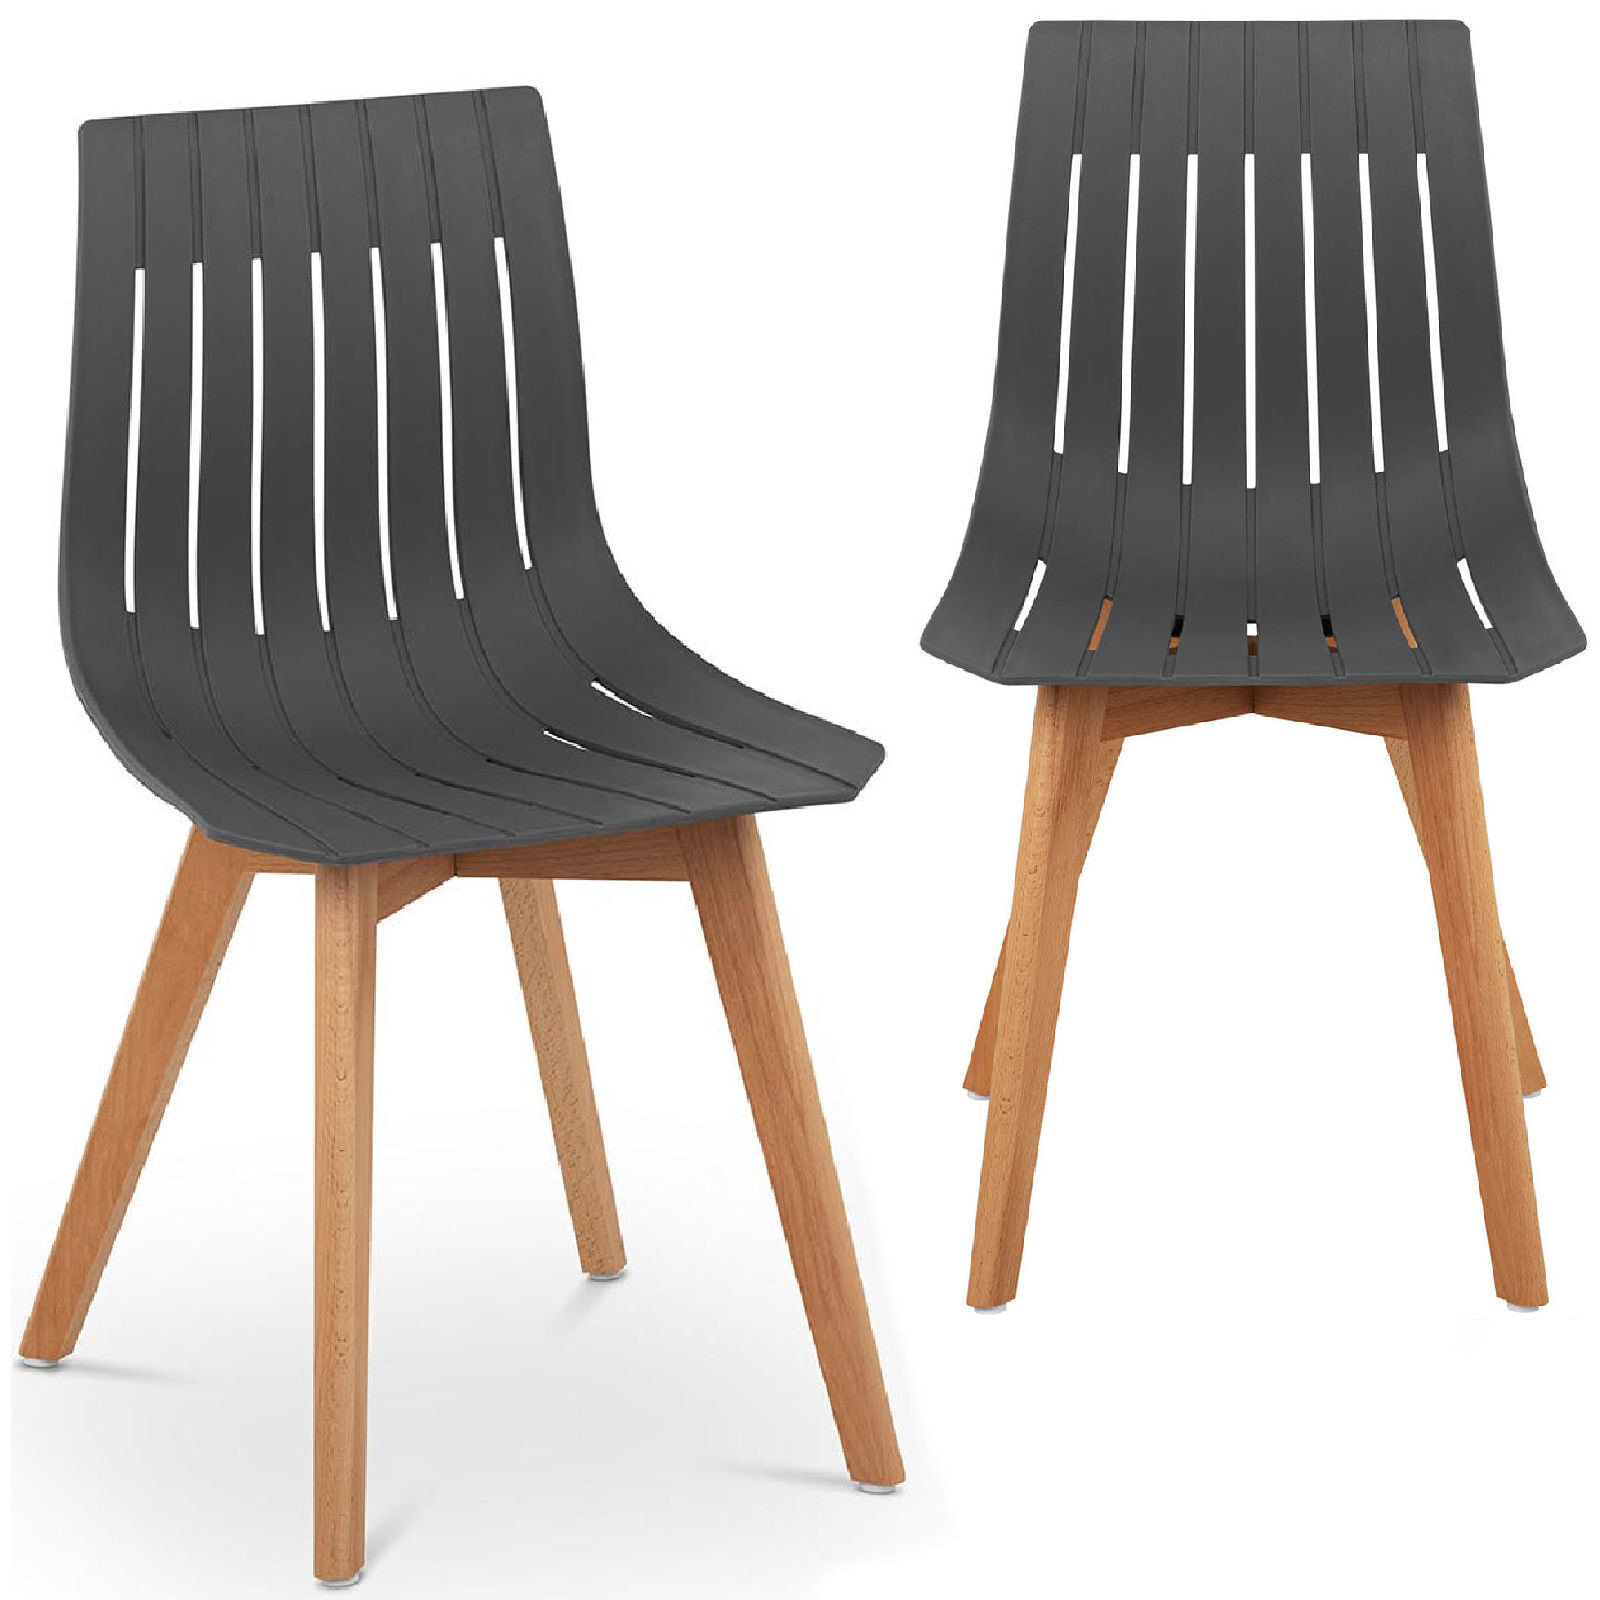 Plastic chair with wooden legs for home office up to 150 kg, 2 pcs. Gray